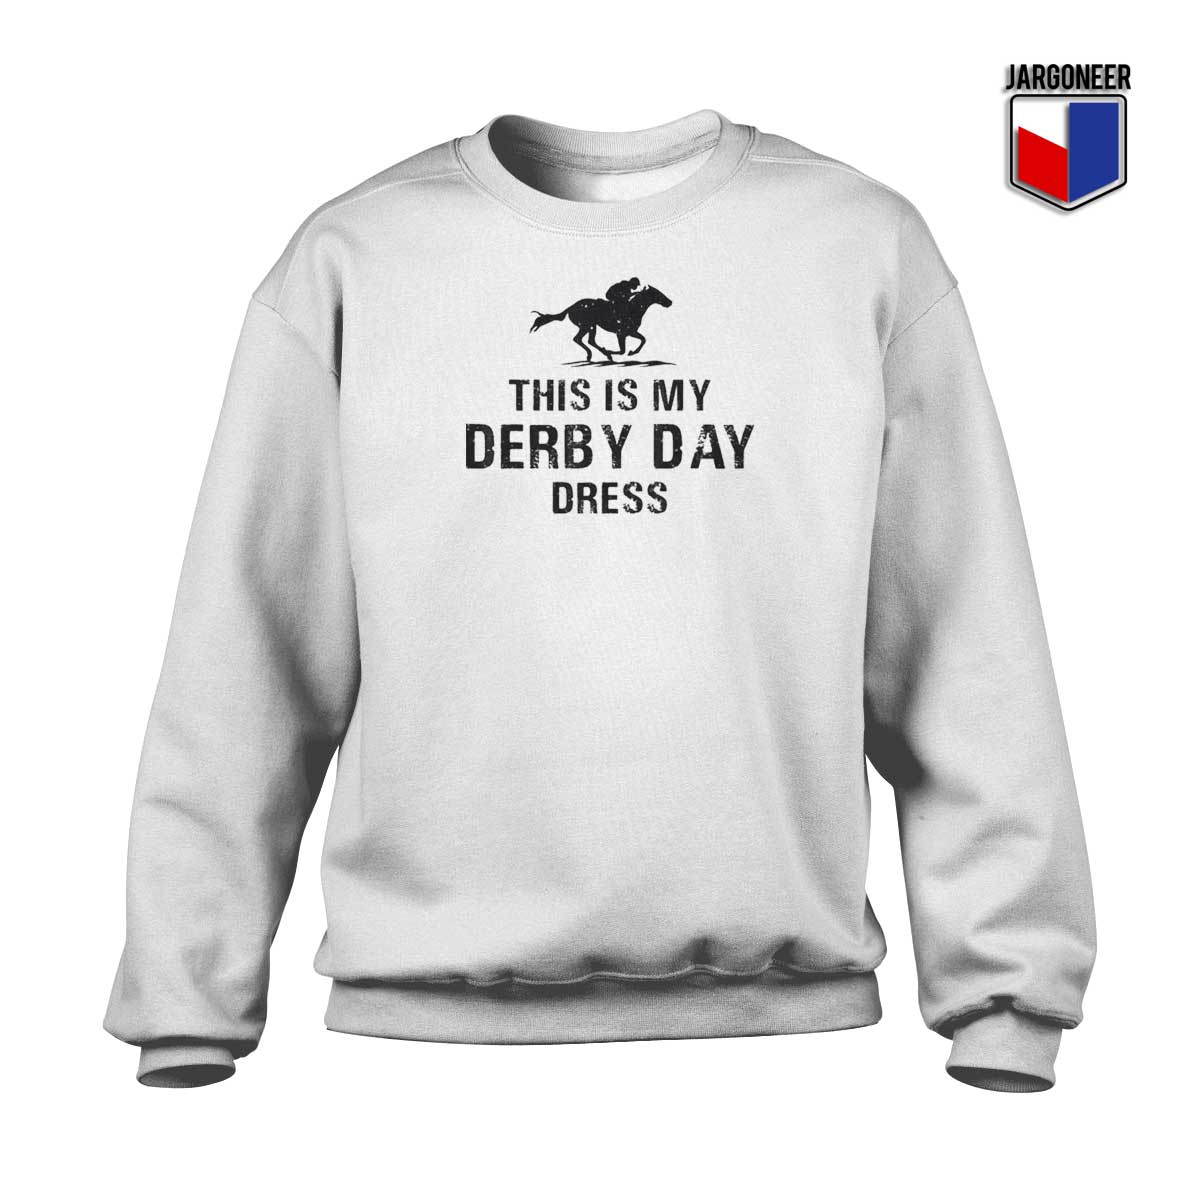 This Is My Derby Day Dress Sweatshirt - Shop Unique Graphic Cool Shirt Designs